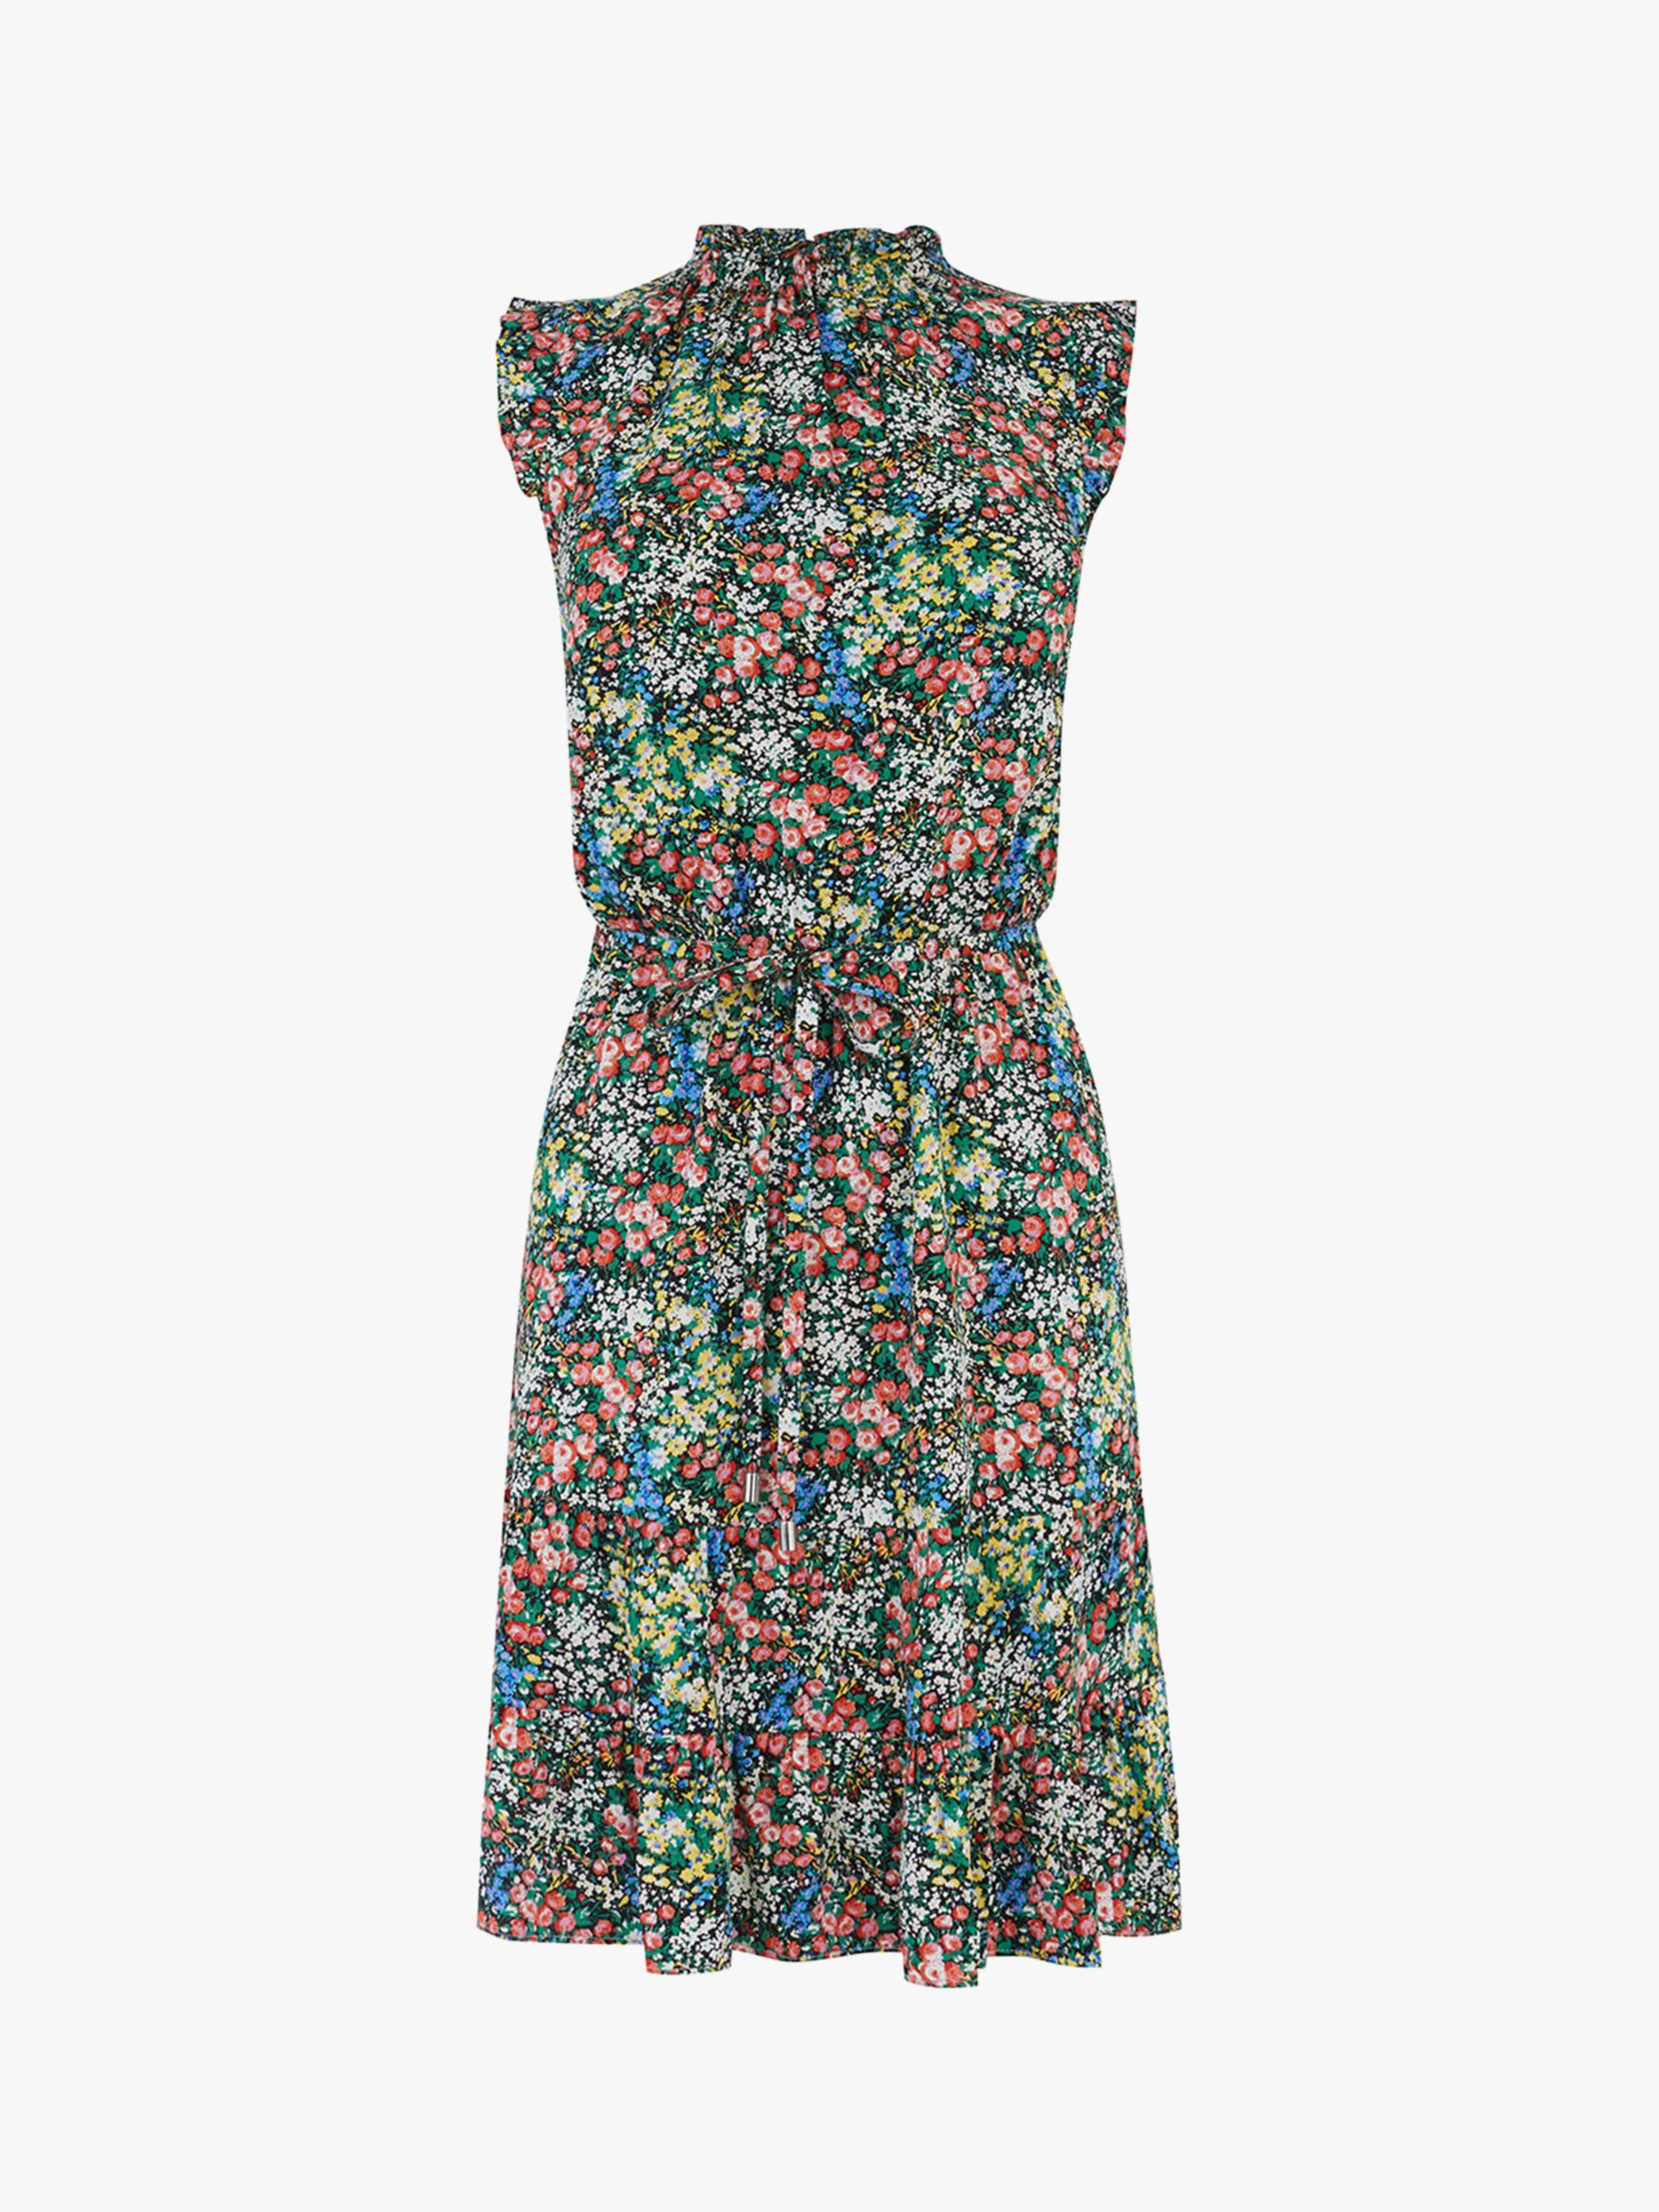 Oasis Ditsy Floral Dress, Multi